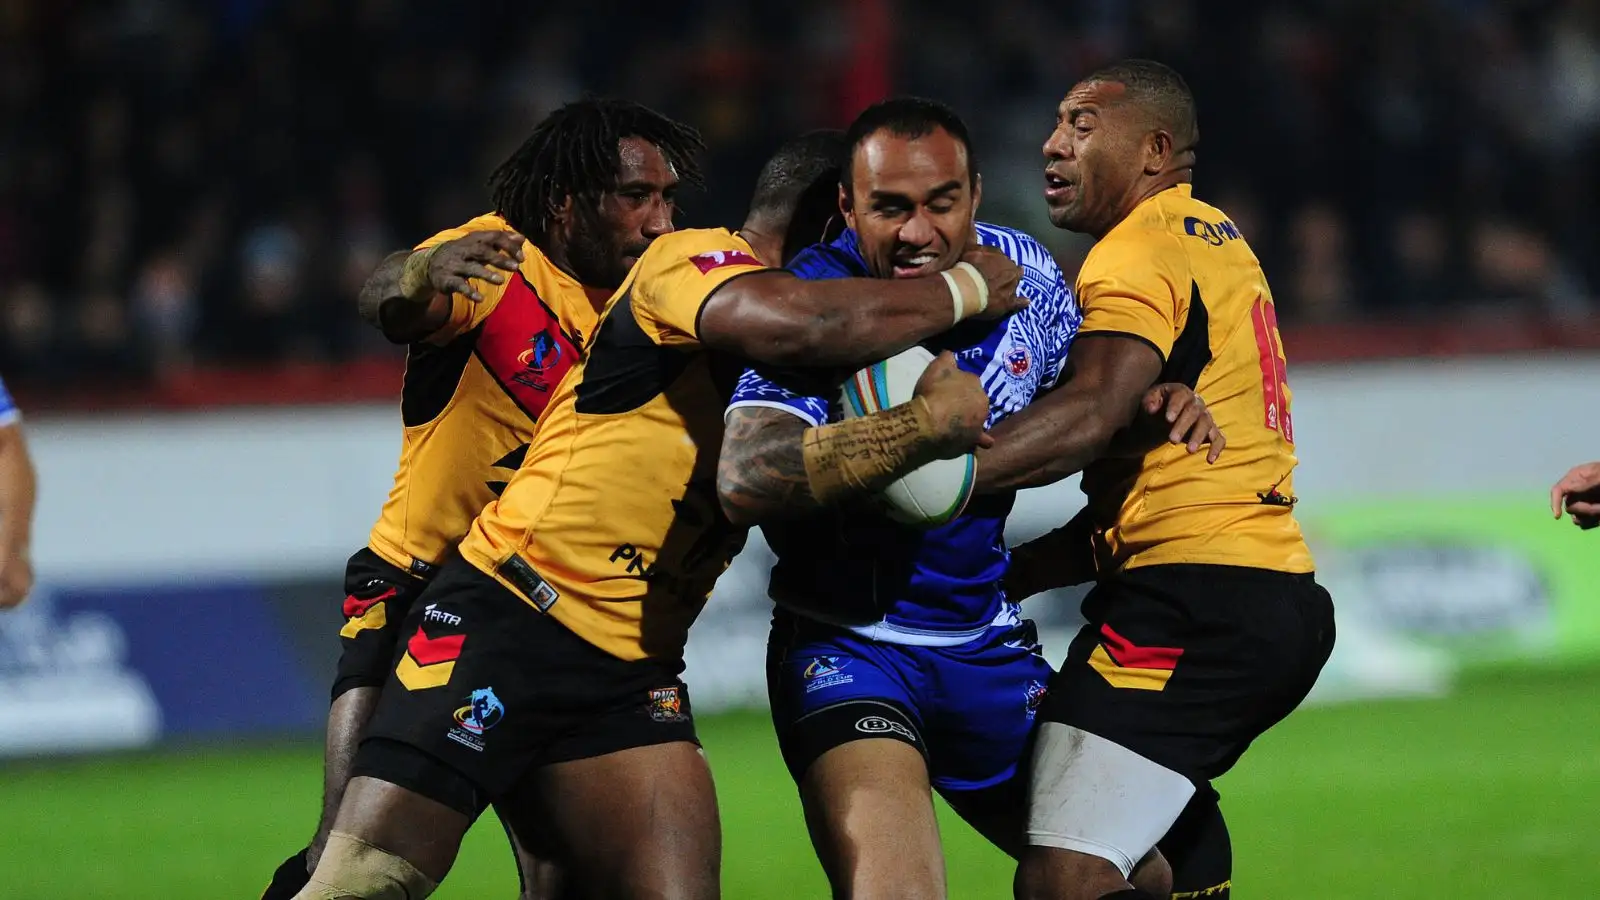 Papua New Guinea ace signs up to play 10th season in England: ‘I’ve been at the club a long time now!’